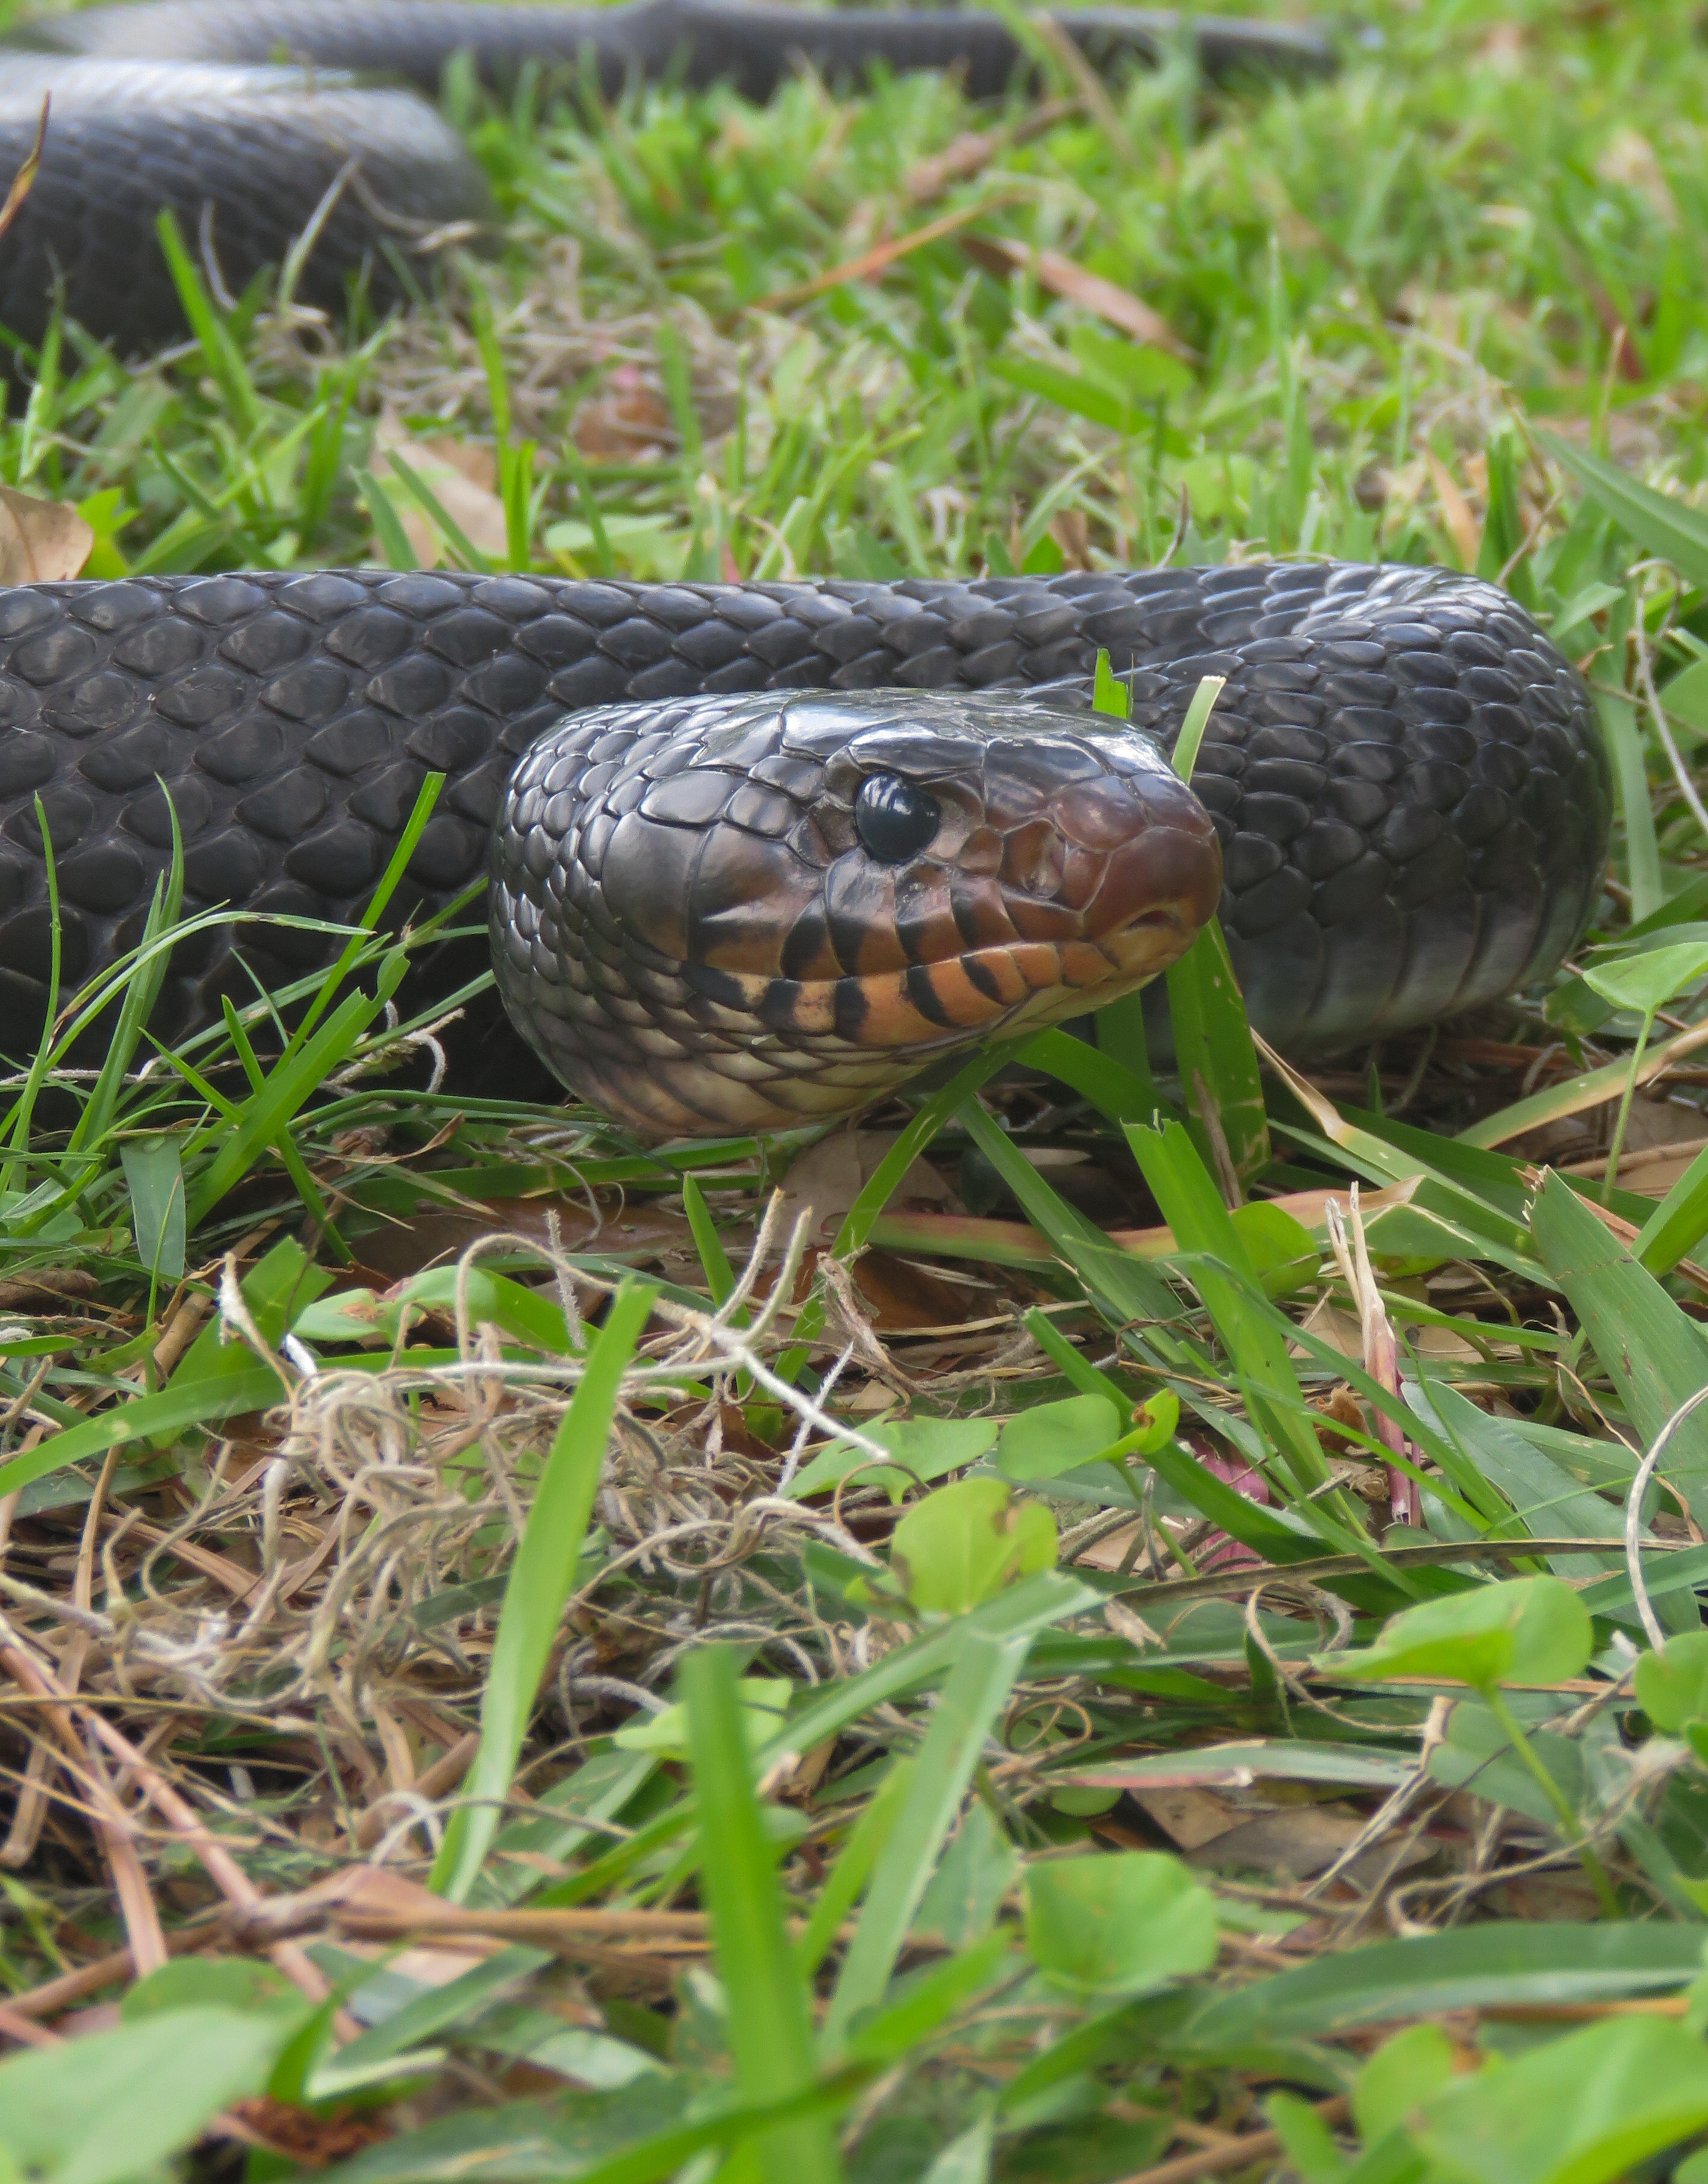 Eastern indigo snake in an S shape in the grass. 